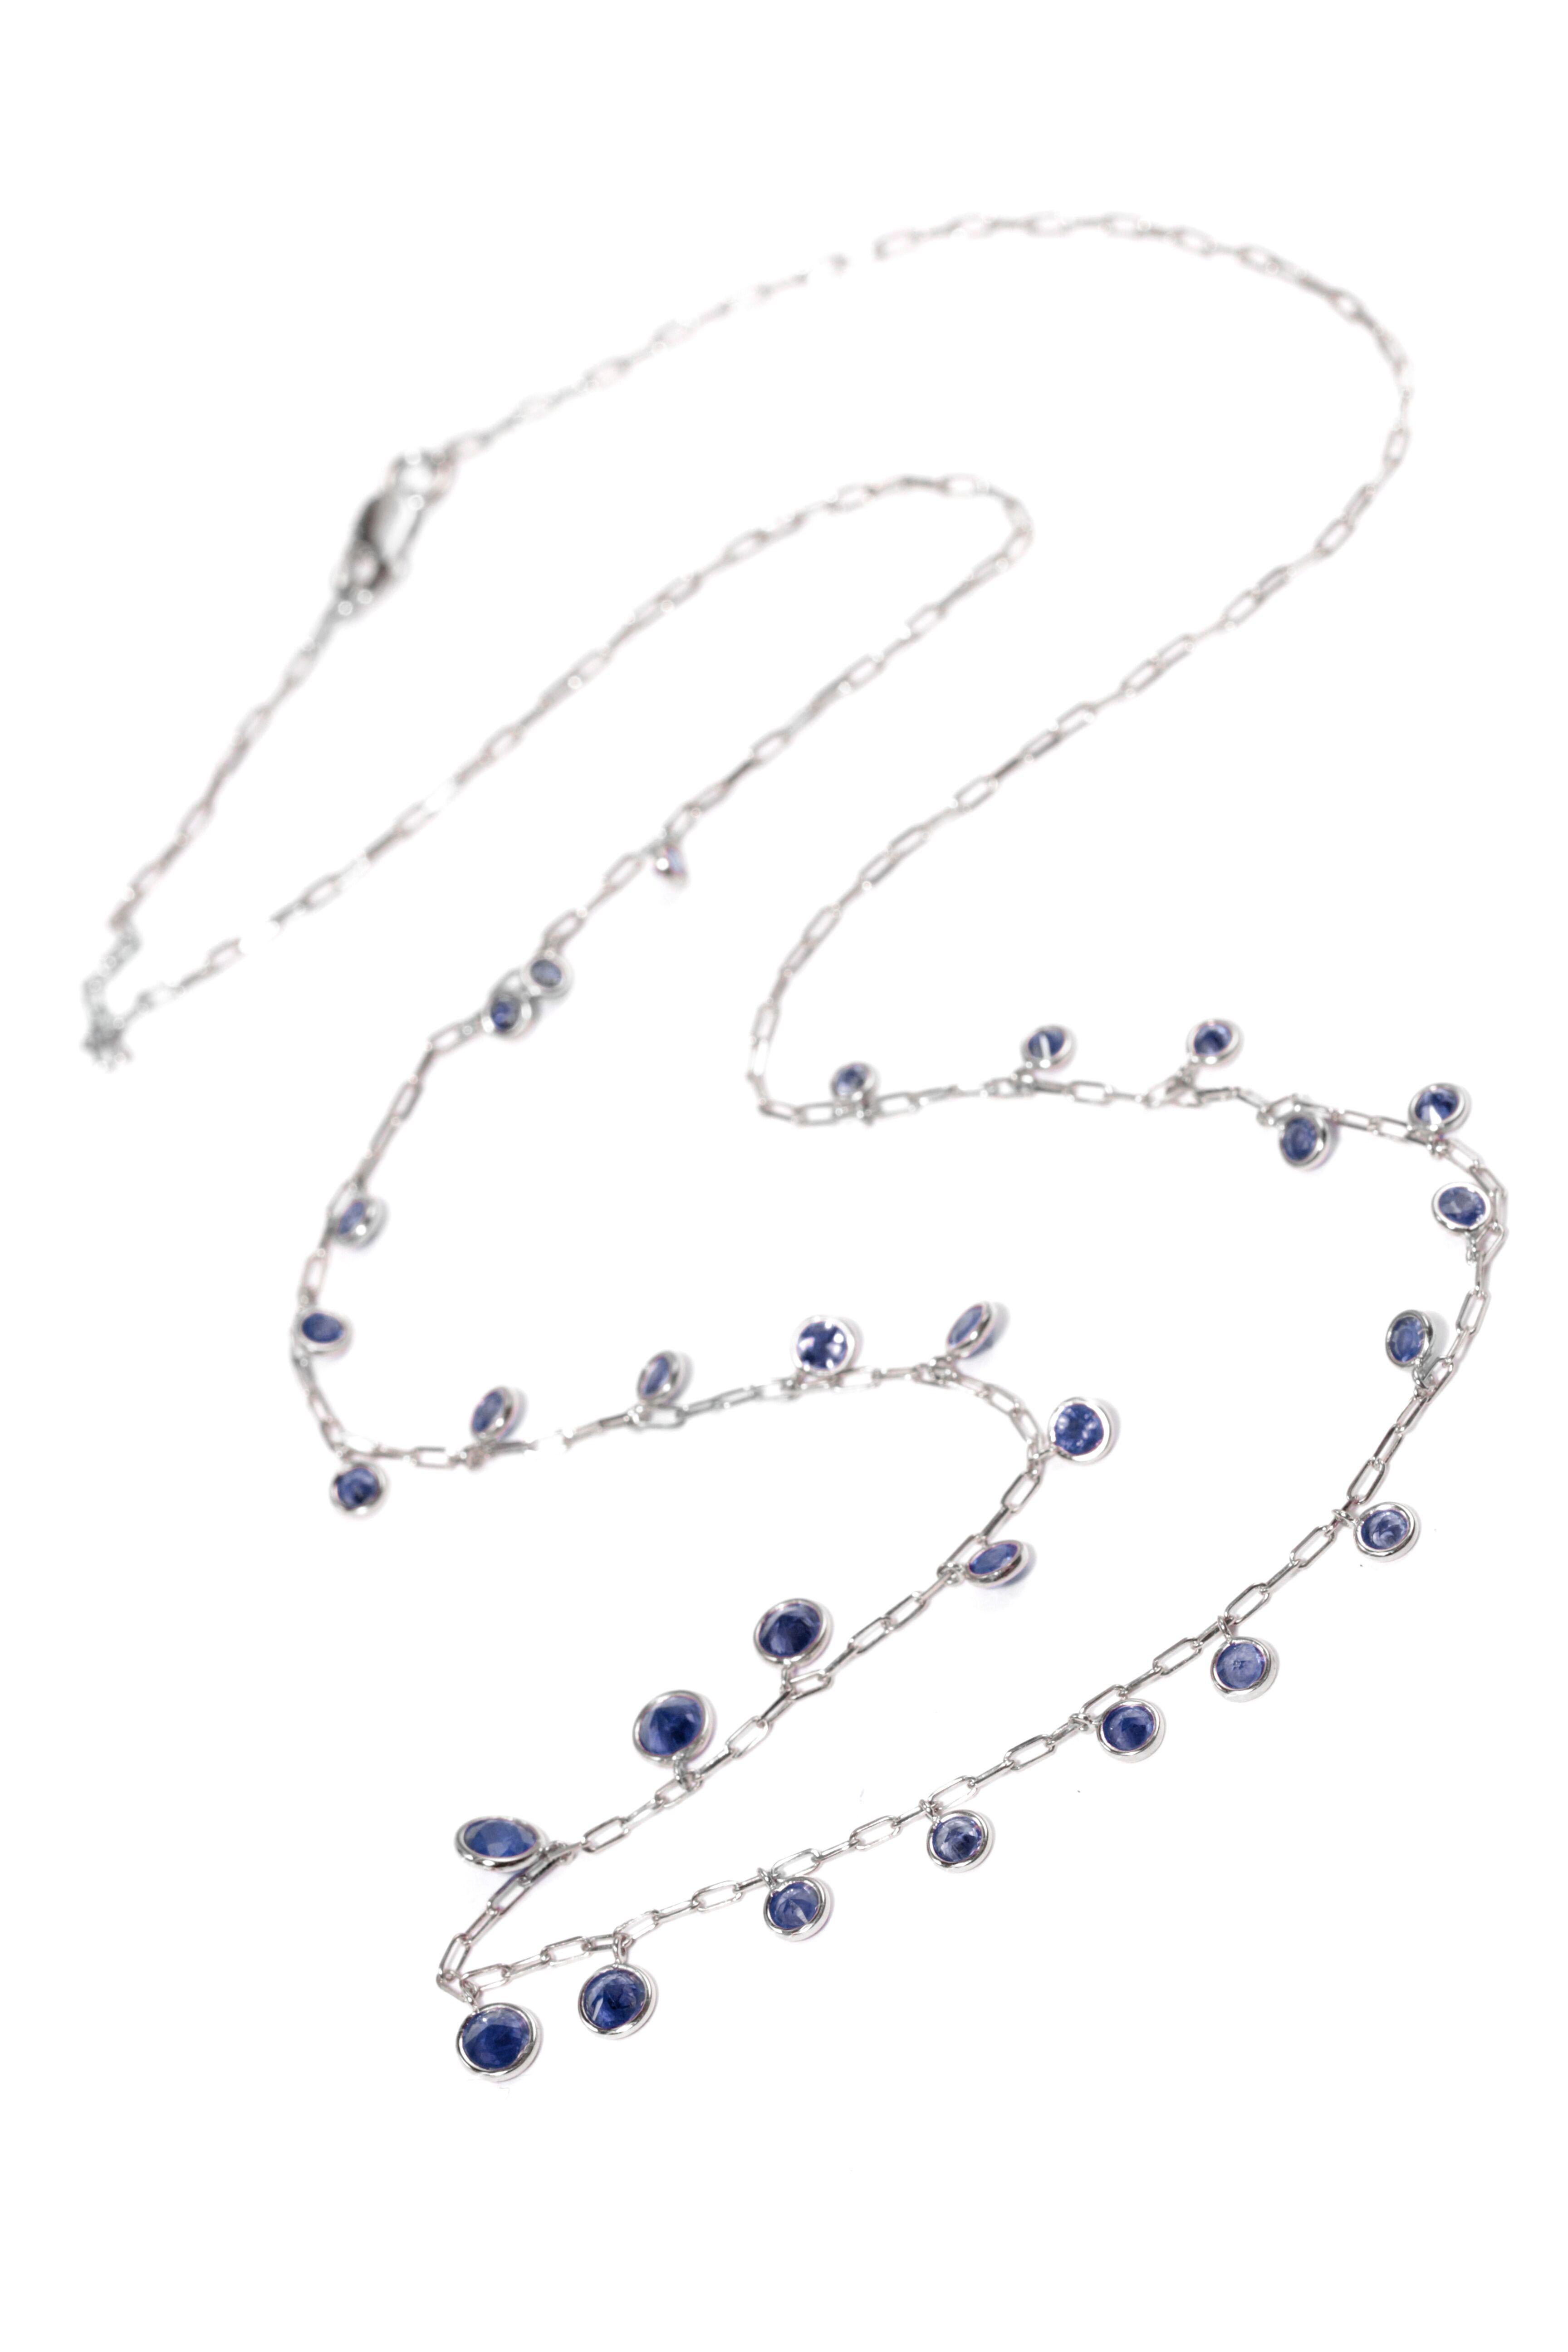 Exclusively designed by Ara Vartanian, this 18 Karat White Gold Necklace features 29 round faceted Blue Sapphires totalling 3.81 Carats.

Because this necklace is made exclusively by and for Ara Vartanian, bespoke alterations can be accommodated,